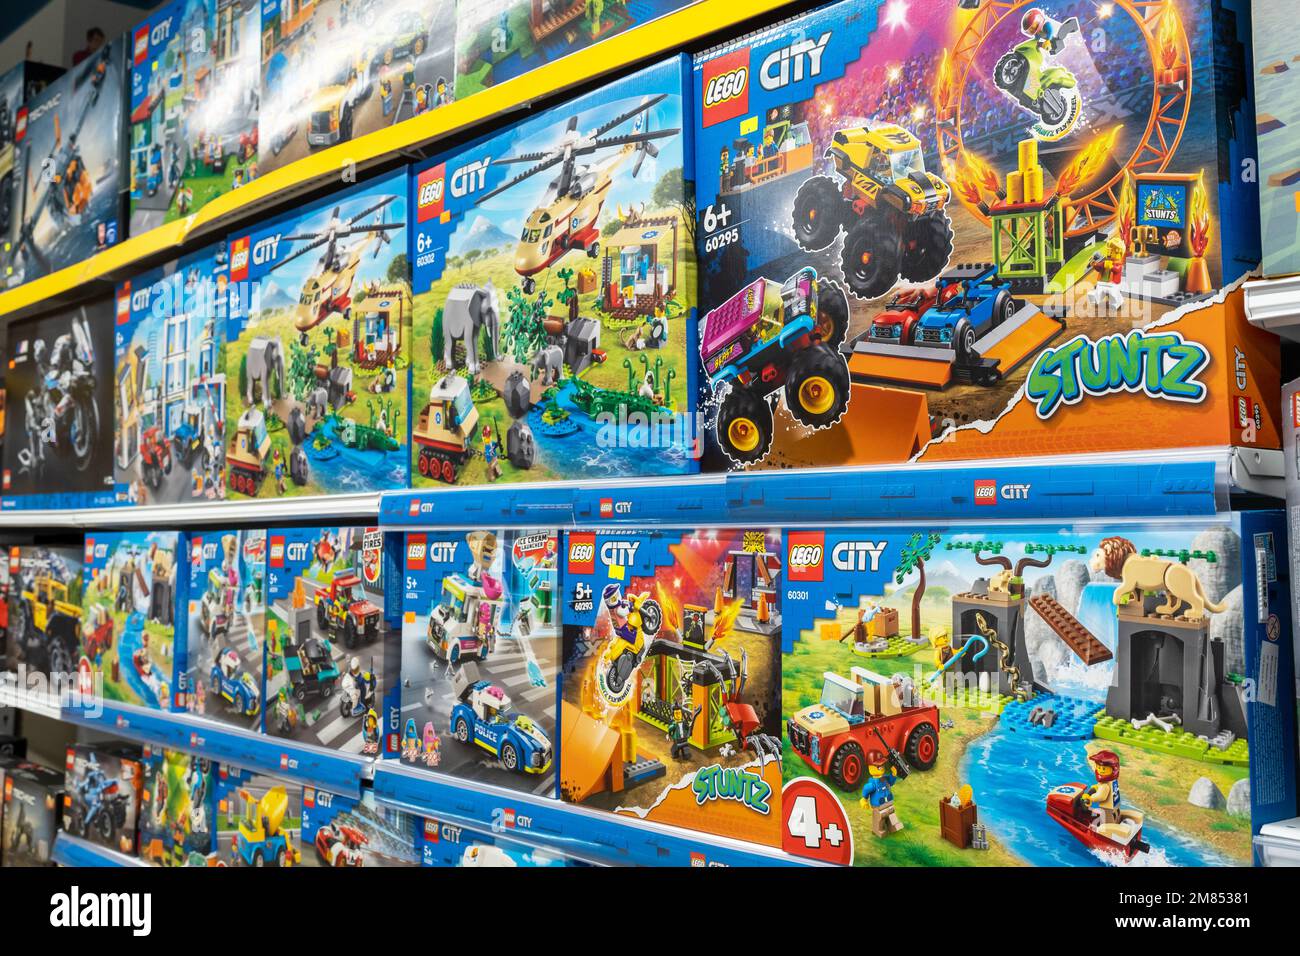 Lego construction kits for sale in supermarket. Lego is a line of plastic construction toys that are manufactured by The Lego Group company in Denmark Stock Photo